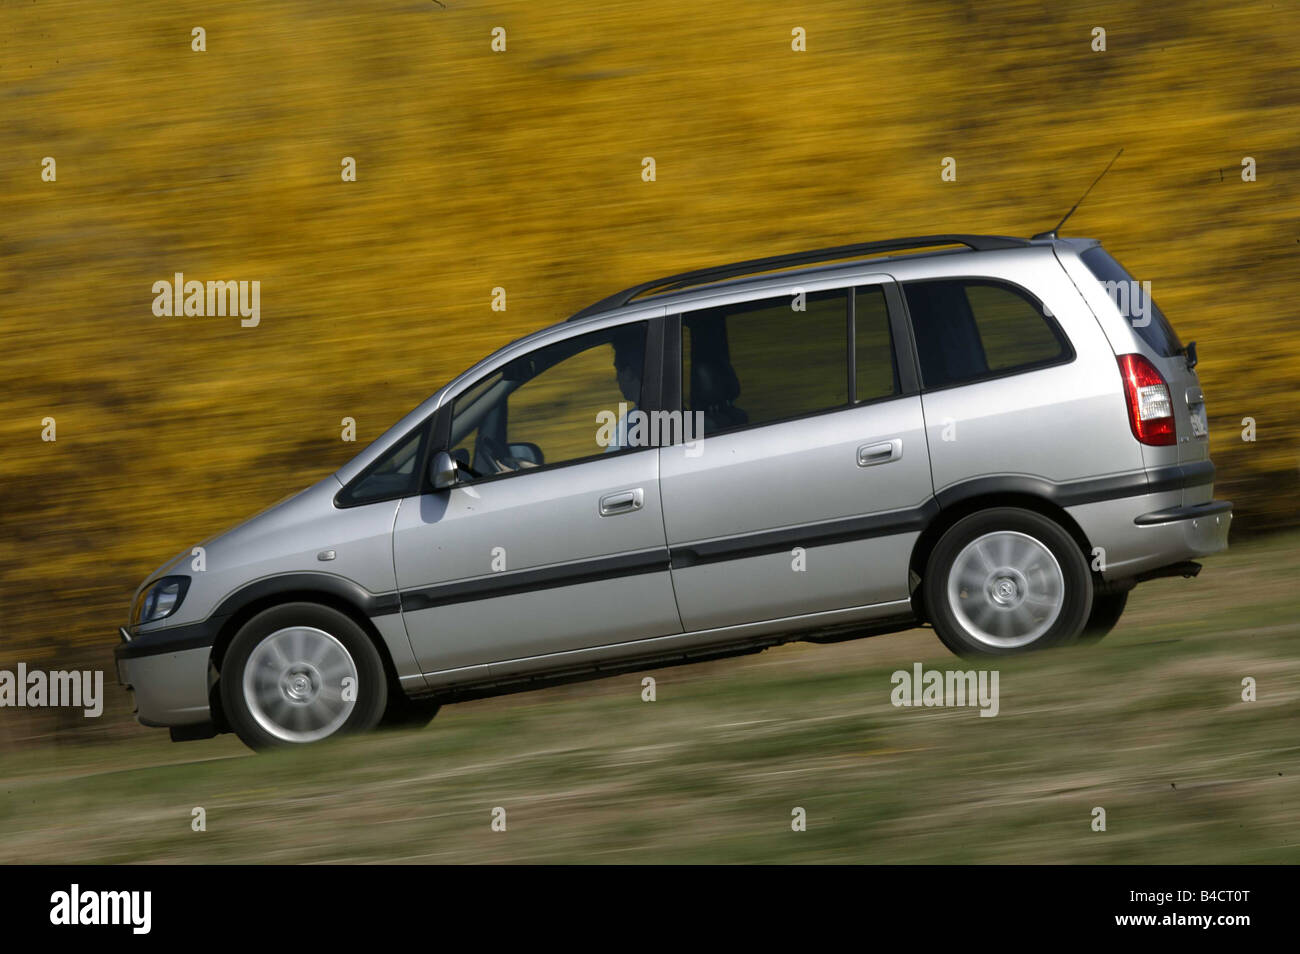 Car, Opel Zafira 2.2 DTI, model year 2003-, silver, Van, driving, side view, country road Stock Photo